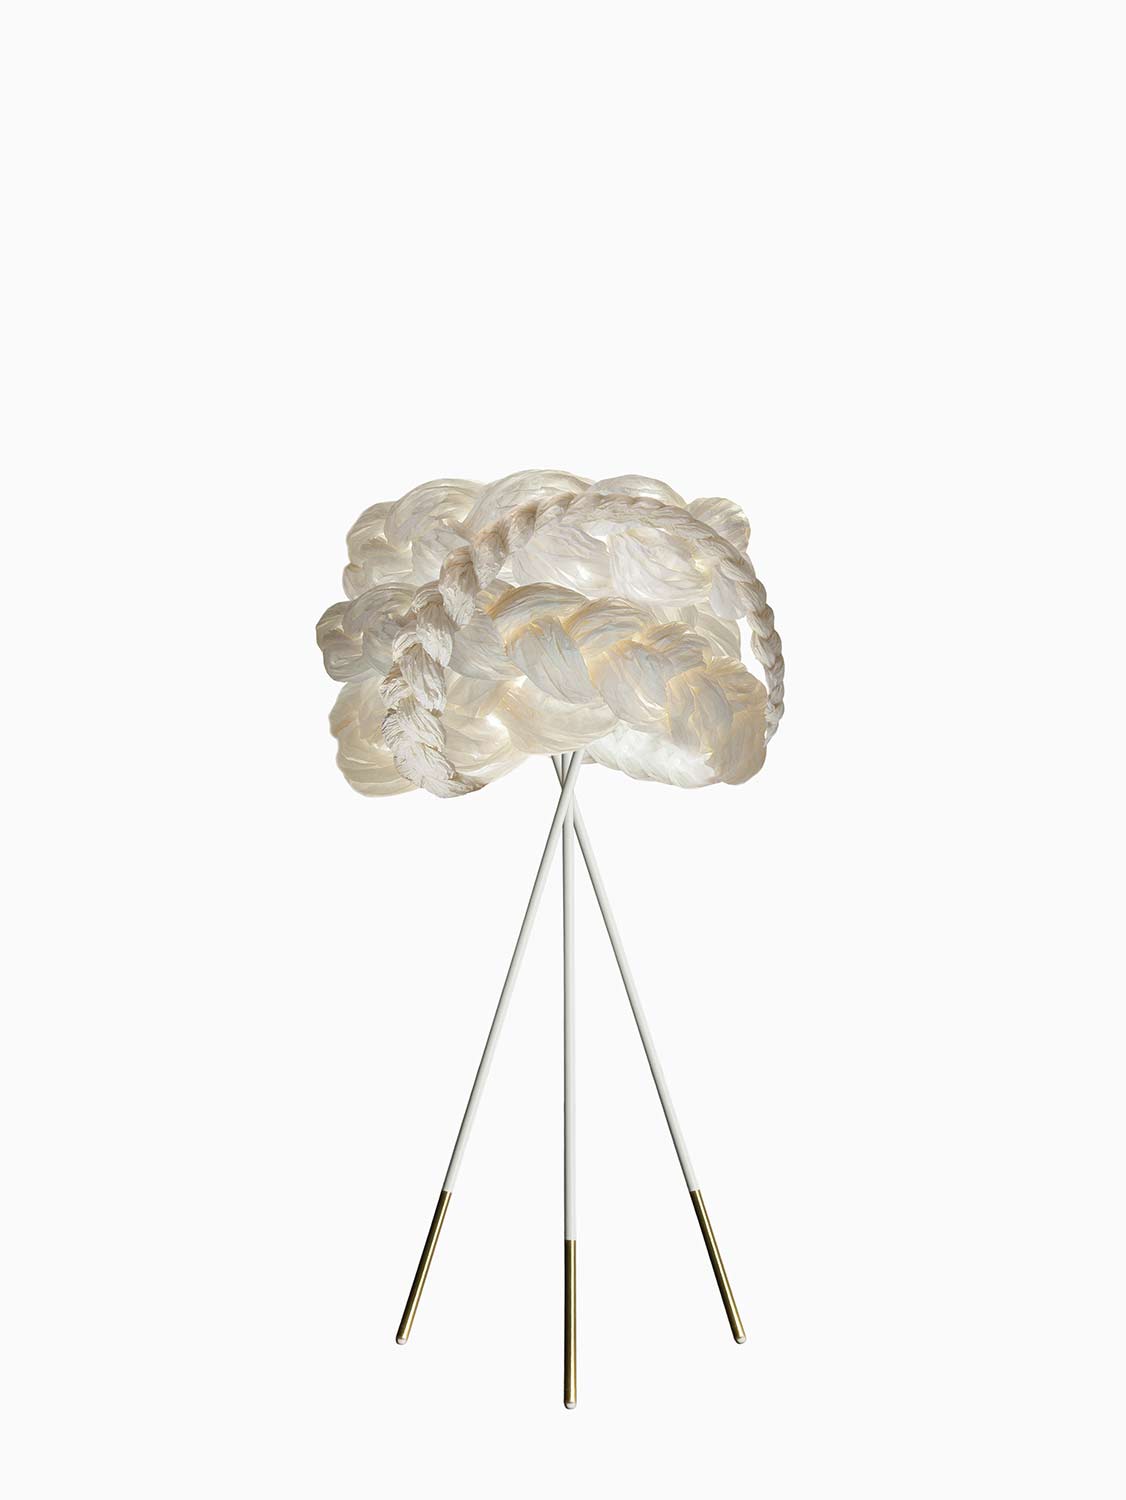 White Paper Braided Unique Handmade Table Lamp | Cozy Atmosphere Lighting | Contemporary Natural Lighting for Living room,  Bedroom & Lobby | Sustainable Design Lighting | baby & kids room lighting | White interior | mammalampa The Bride table lamp 